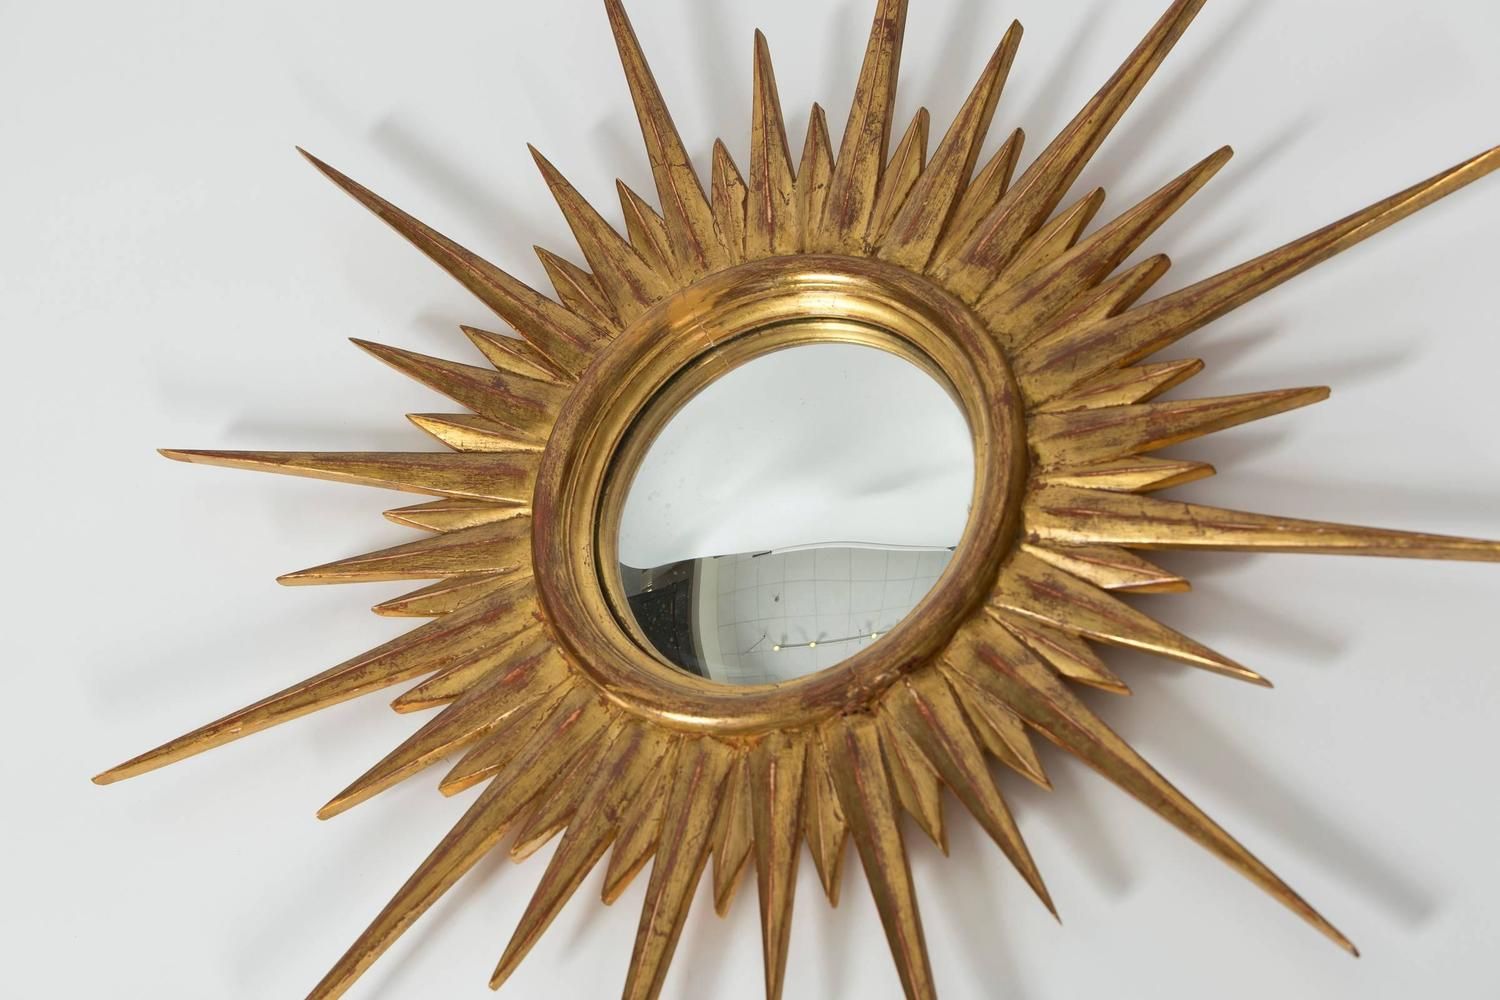 Antique Gold Leaf Sunburst Mirror At 1stdibs Intended For Ring Shield Gold Leaf Wall Mirrors (View 9 of 15)